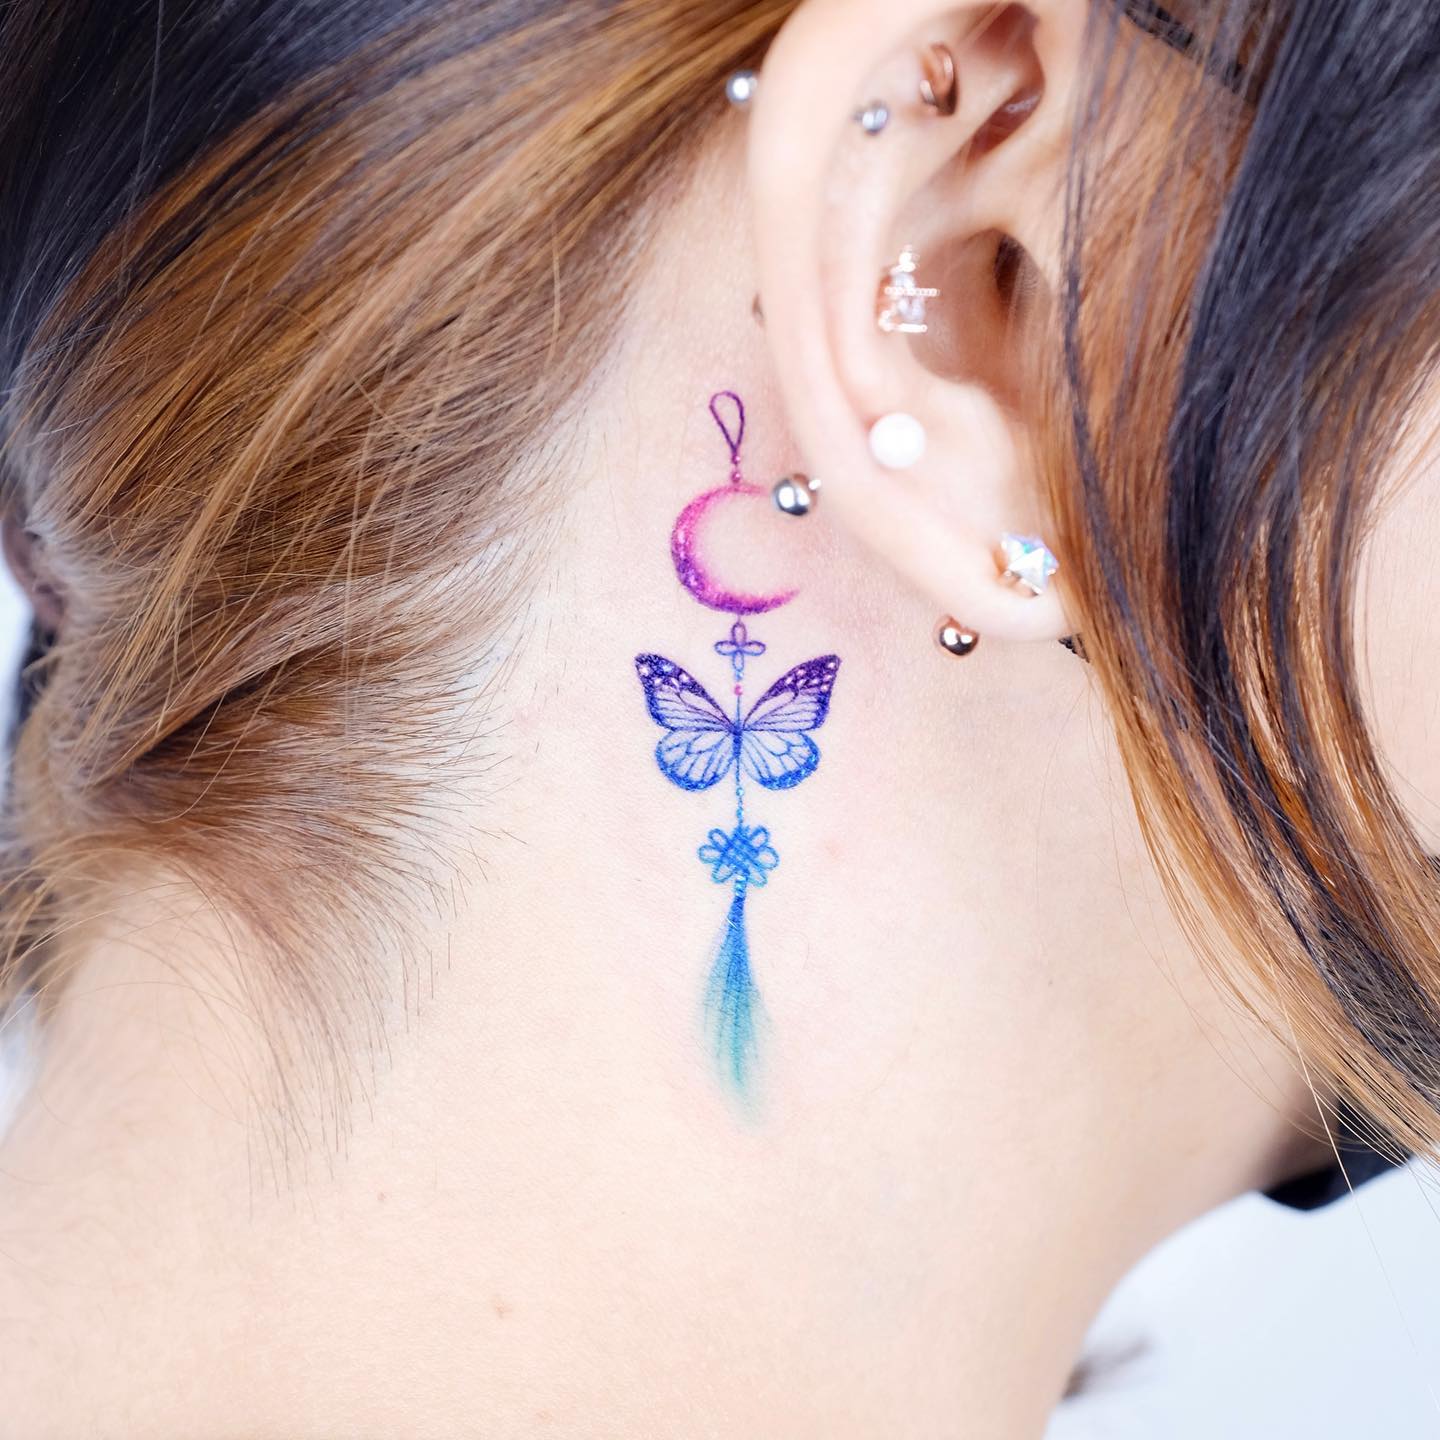 Behind the ear butterfly tattoo with moon symbol